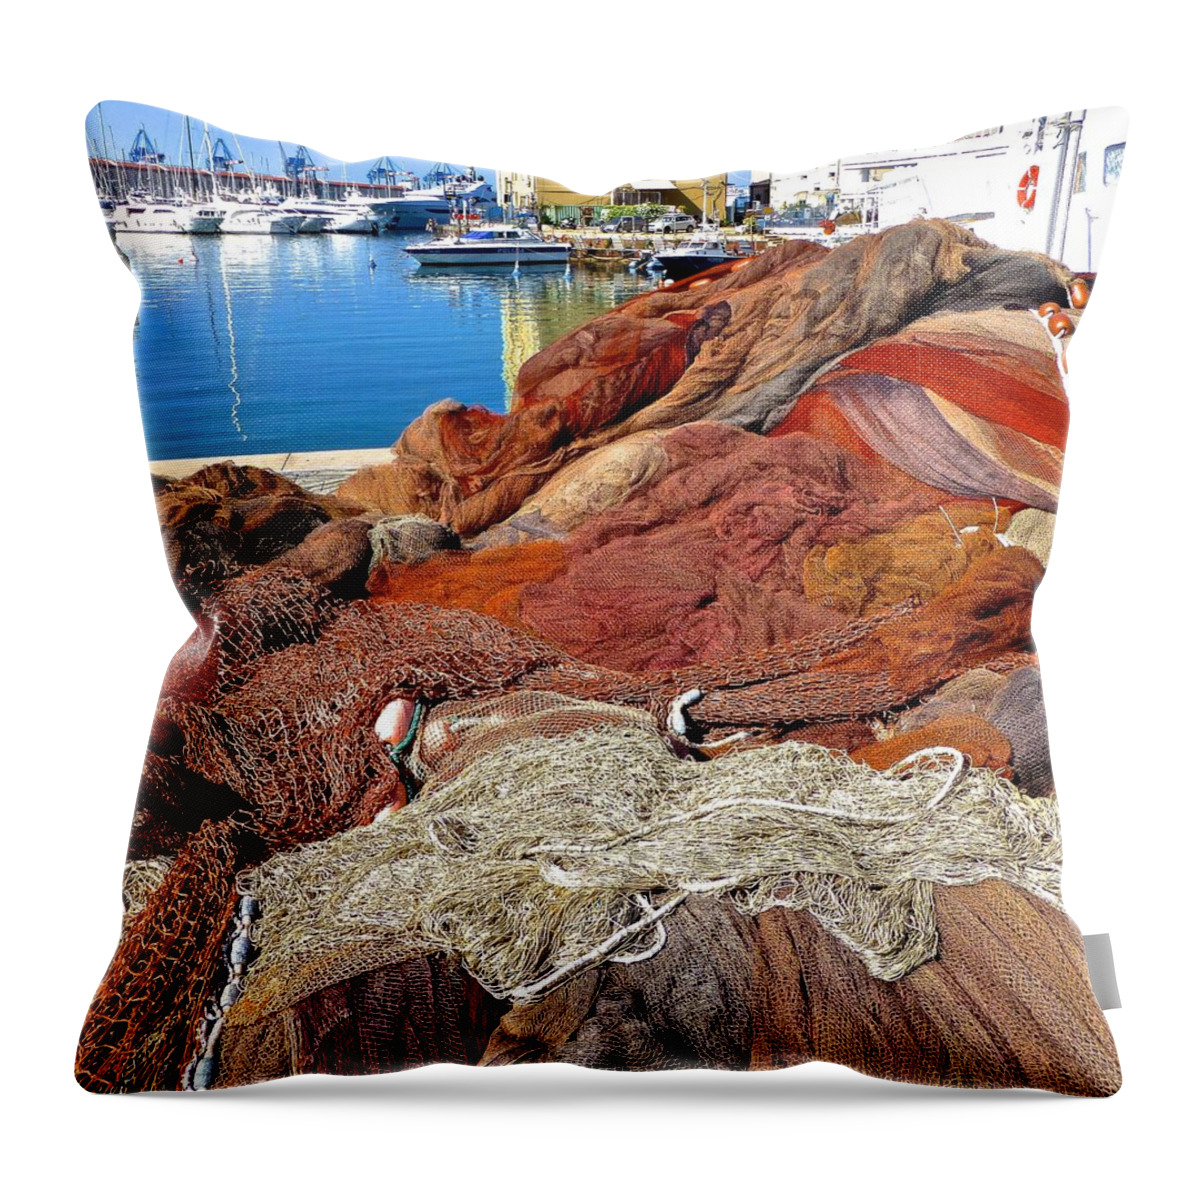 Genoa Throw Pillow featuring the photograph Fishing Nets Genoa Harbor by Amelia Racca